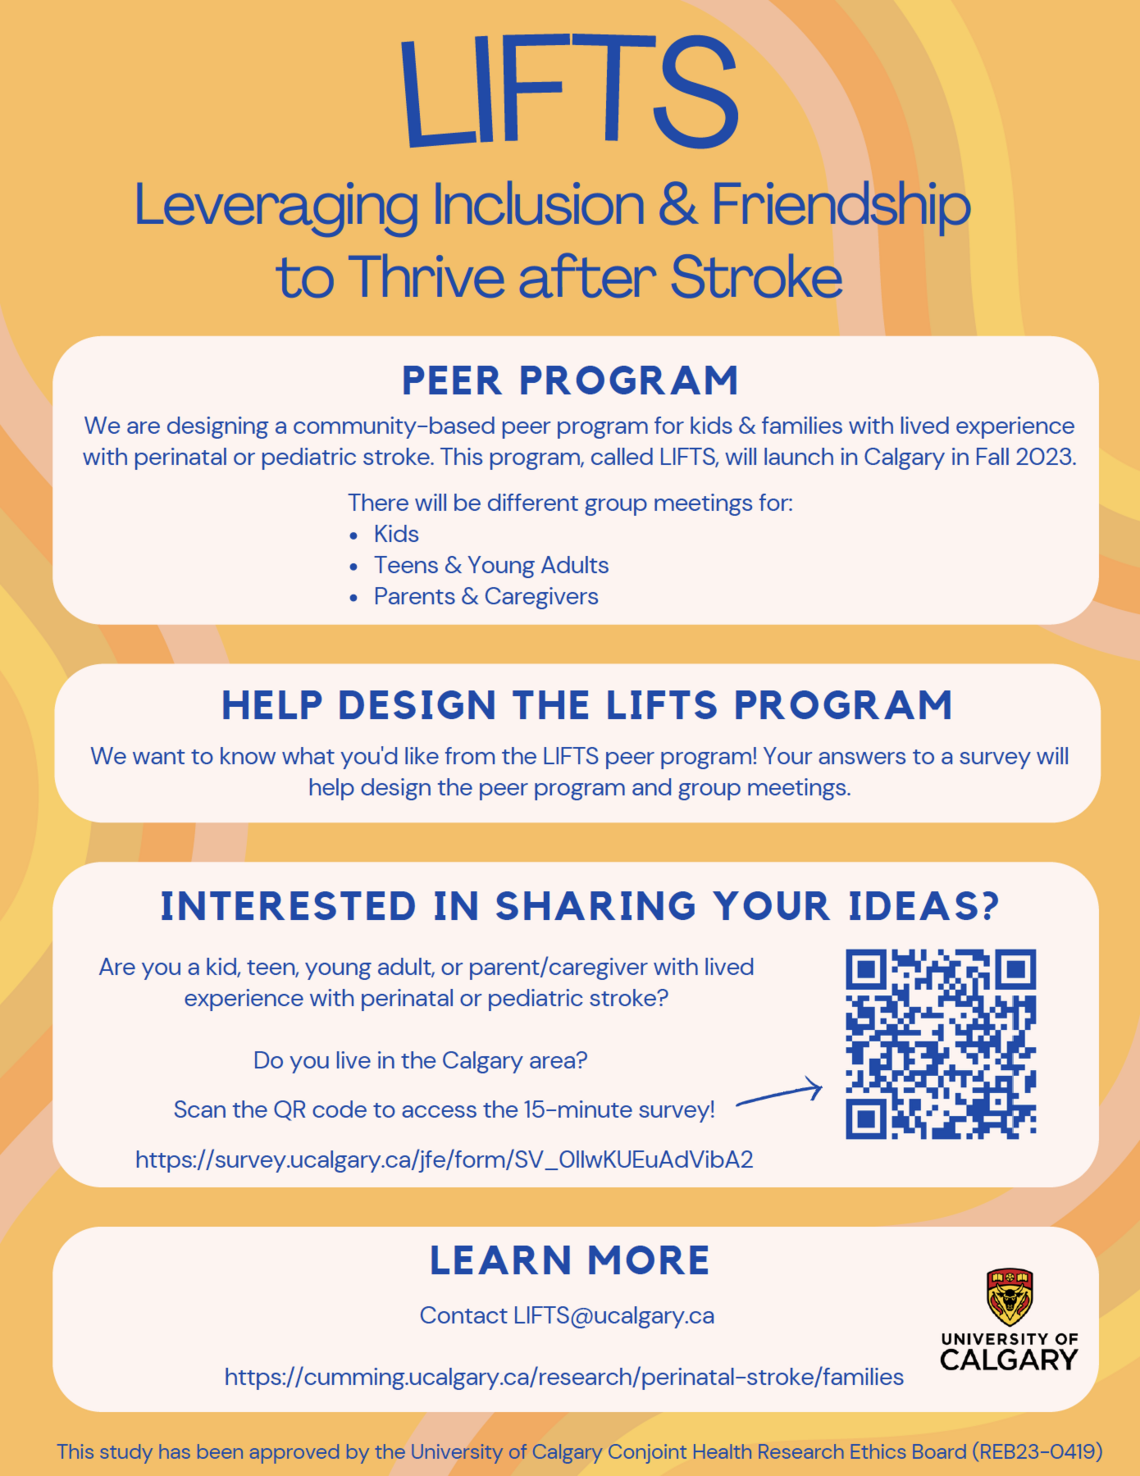 LIFTS - Leveraging Inclusion & Friendship to Thrive after Stroke